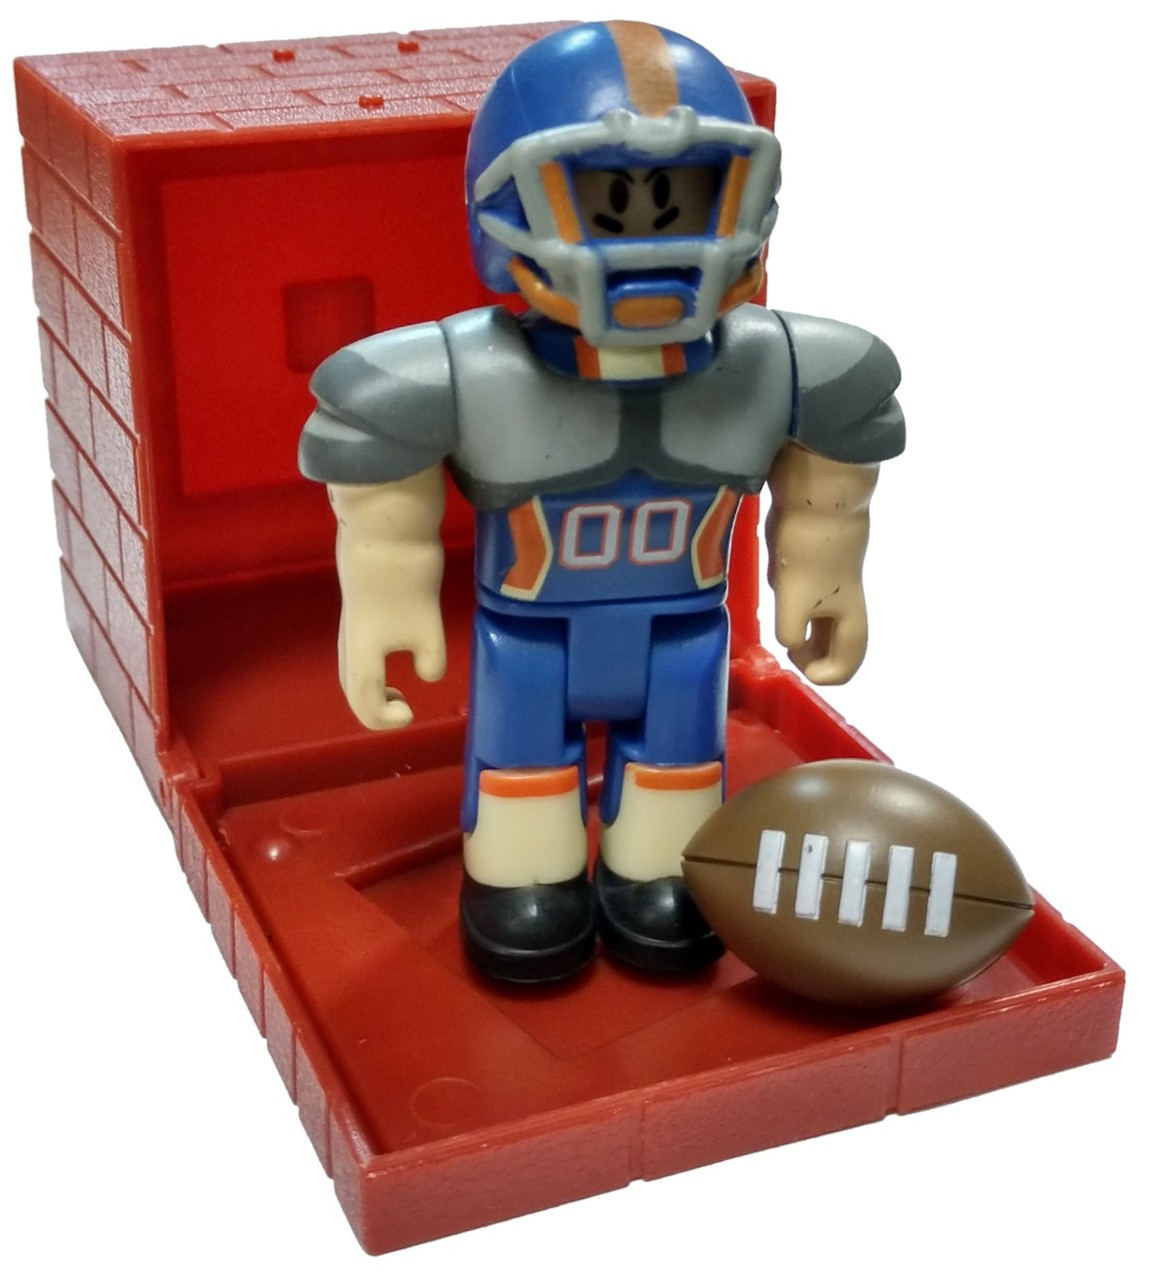 Roblox Red Series 4 Roblox High School Quarterback 3 Mini Figure With Red Cube And Online Code Loose Jazwares Toywiz - how many shrimps do you have to eat roblox code